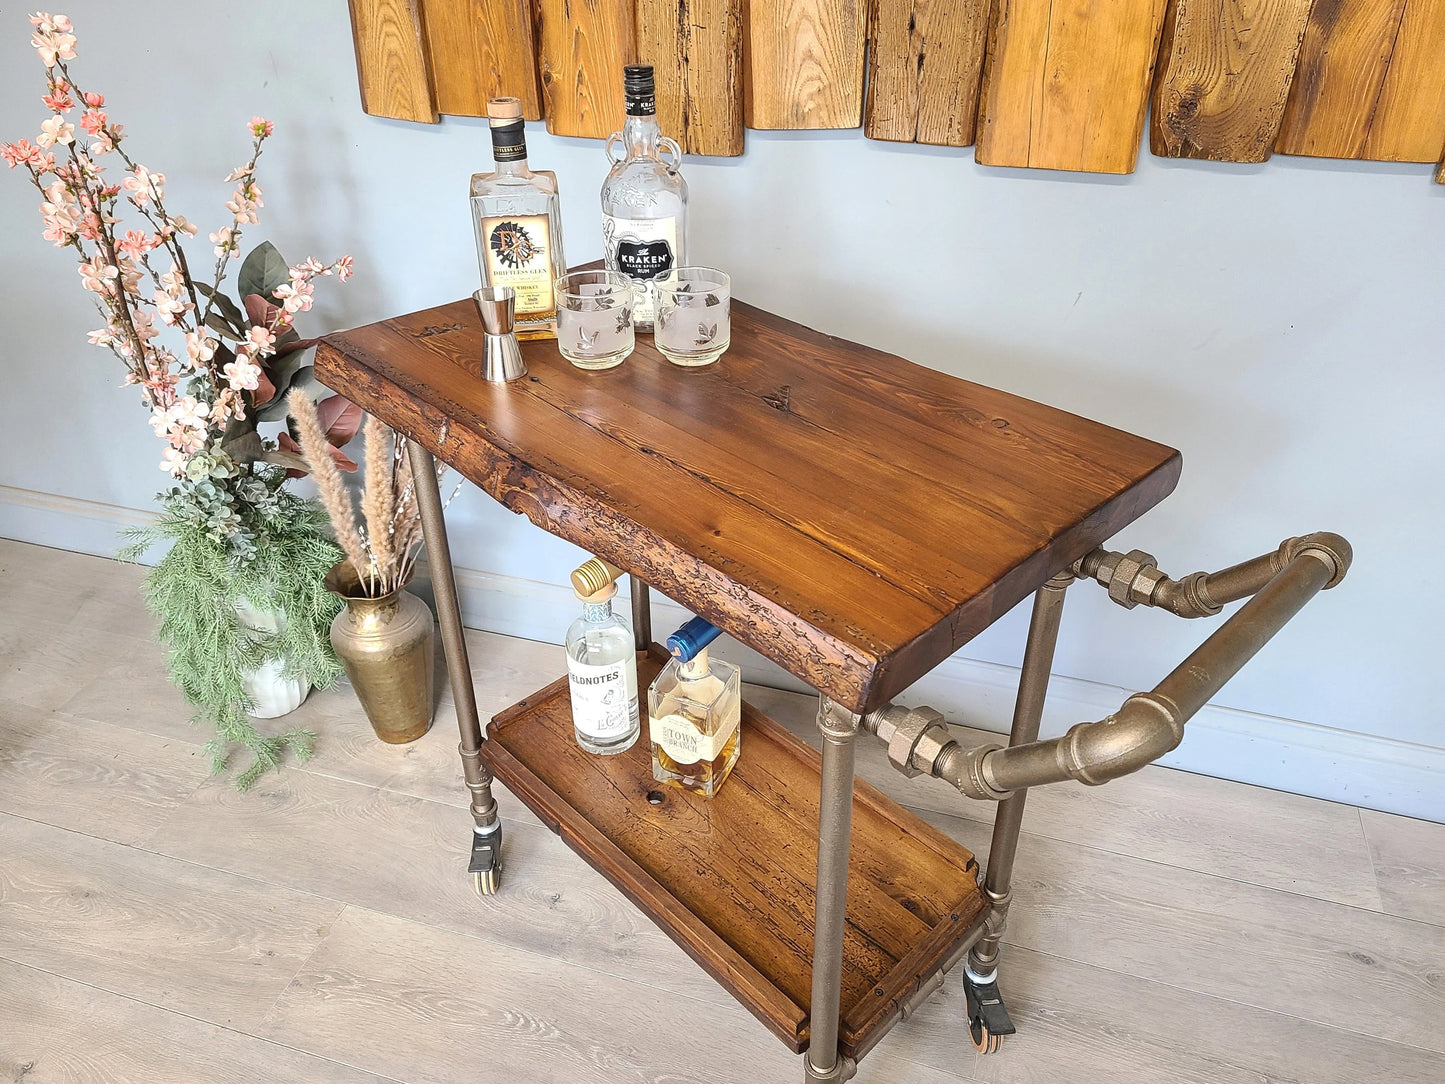 Rolling Bar Cart made of reclaimed barnwood and pipe